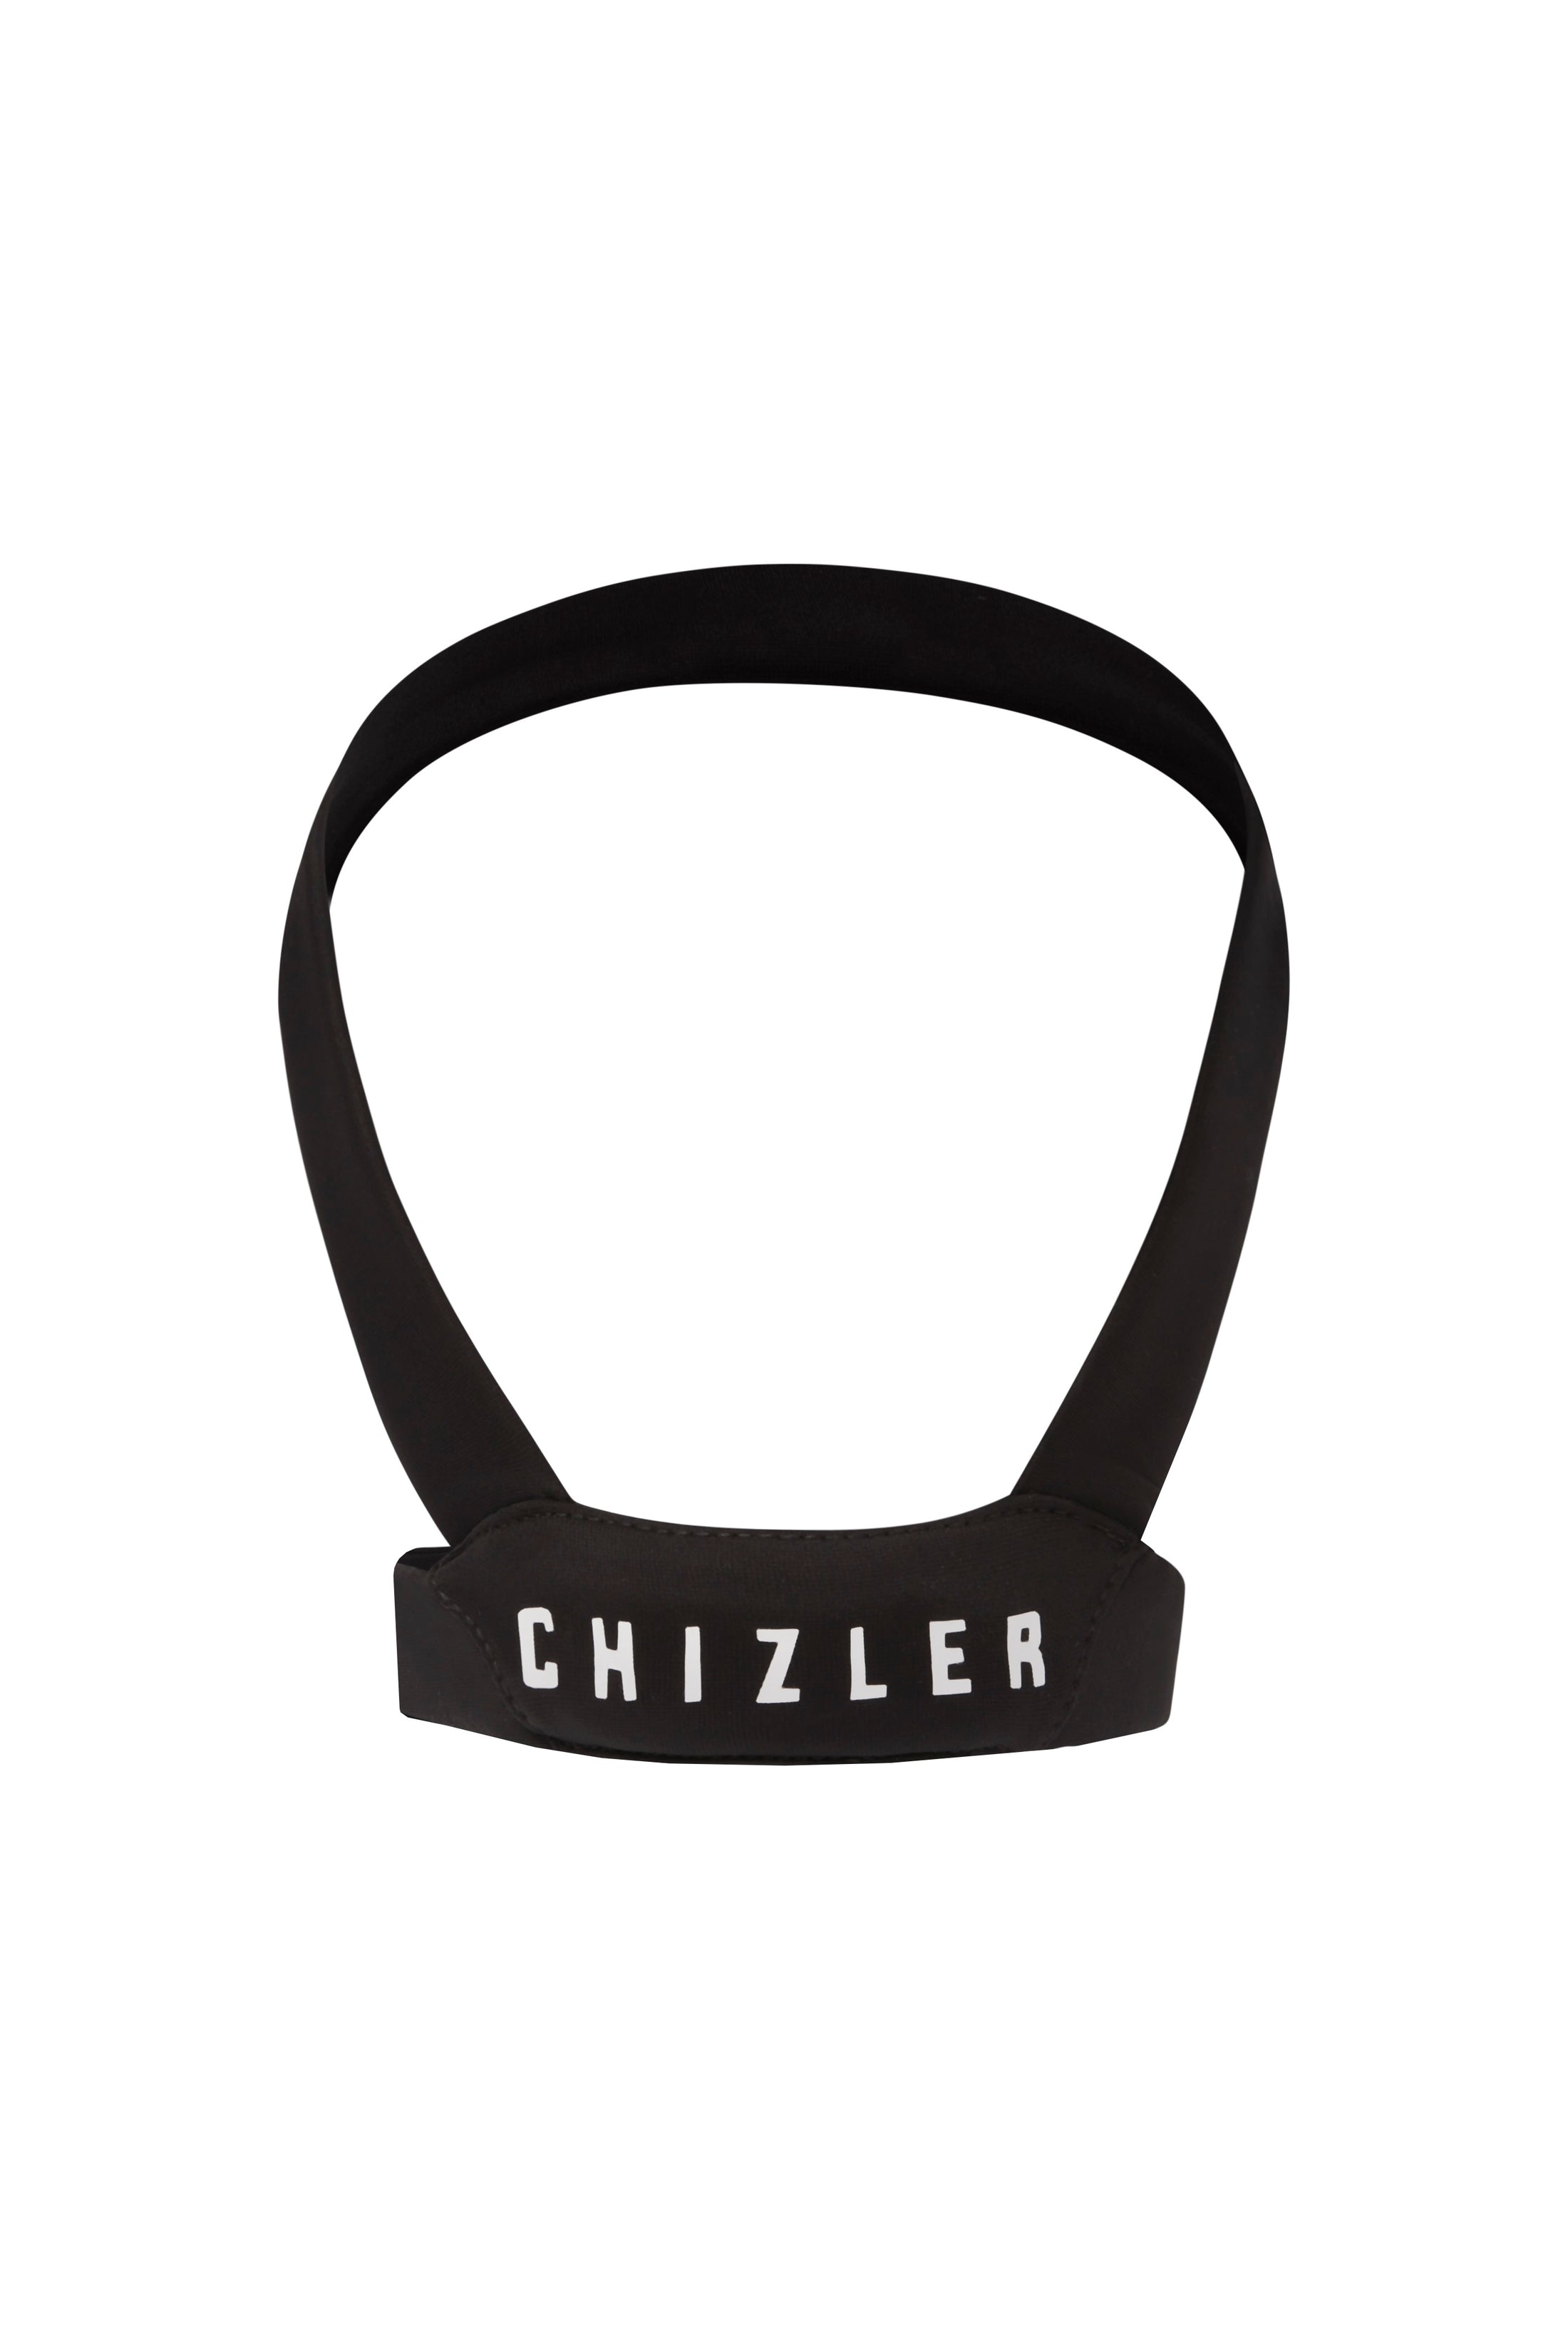 Chin Chizler, Resistance bands, take away double chin, Enhance beauty, Neck tightening, Face fat, remove sagging neck, Workout Gear, Double Chin, enhance Jawline, Strengthen Jaw, Face workout, tmj, Remove Crow's feet, skin health, youthful appearance, face lift, Facial fitness, face exercise , Remove Turkey Neck, Beauty product, Remove Double chin, Jaw Workouts, sharpen Jawline, Kybella, Botox, Jawzrsize, Coolsculpting, Chin Reducer, Cosmetic, Face Yoga, Injectable Fillers, Juvederm, Voluma